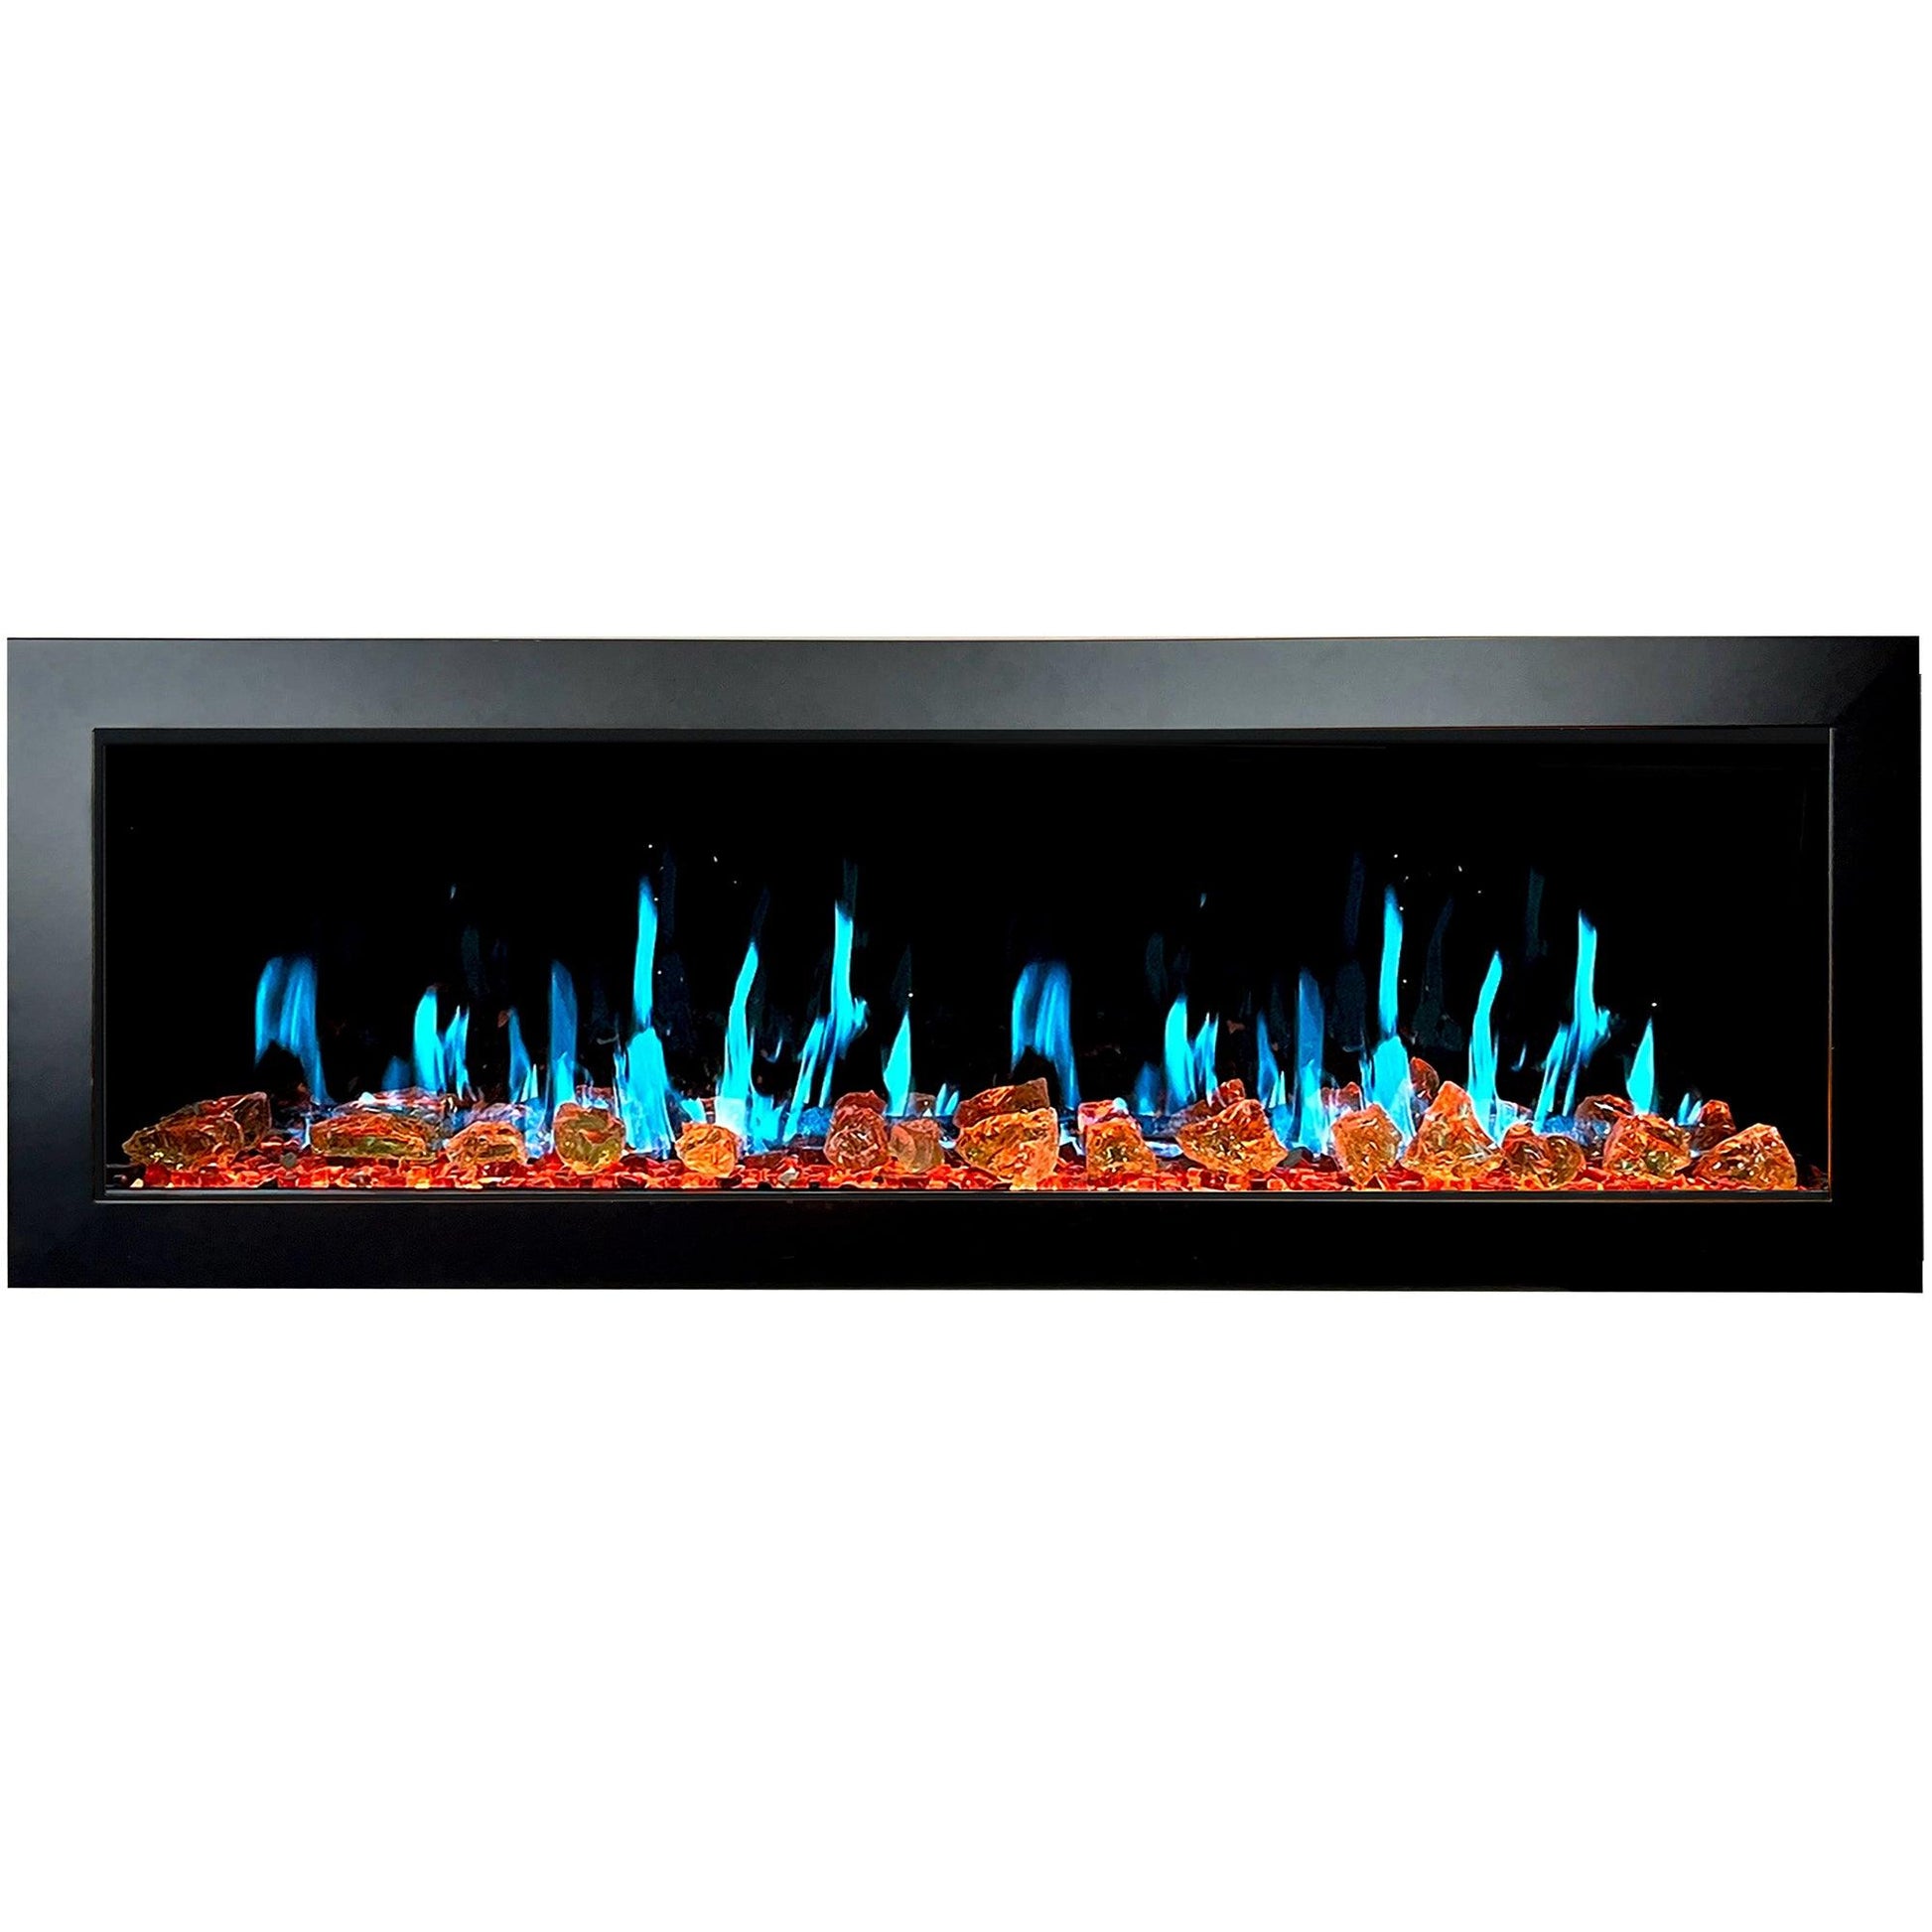 ZopaFlame™ 58" Linear Wall-mount Electric Fireplace - BG19588V - ZopaFlame Fireplaces